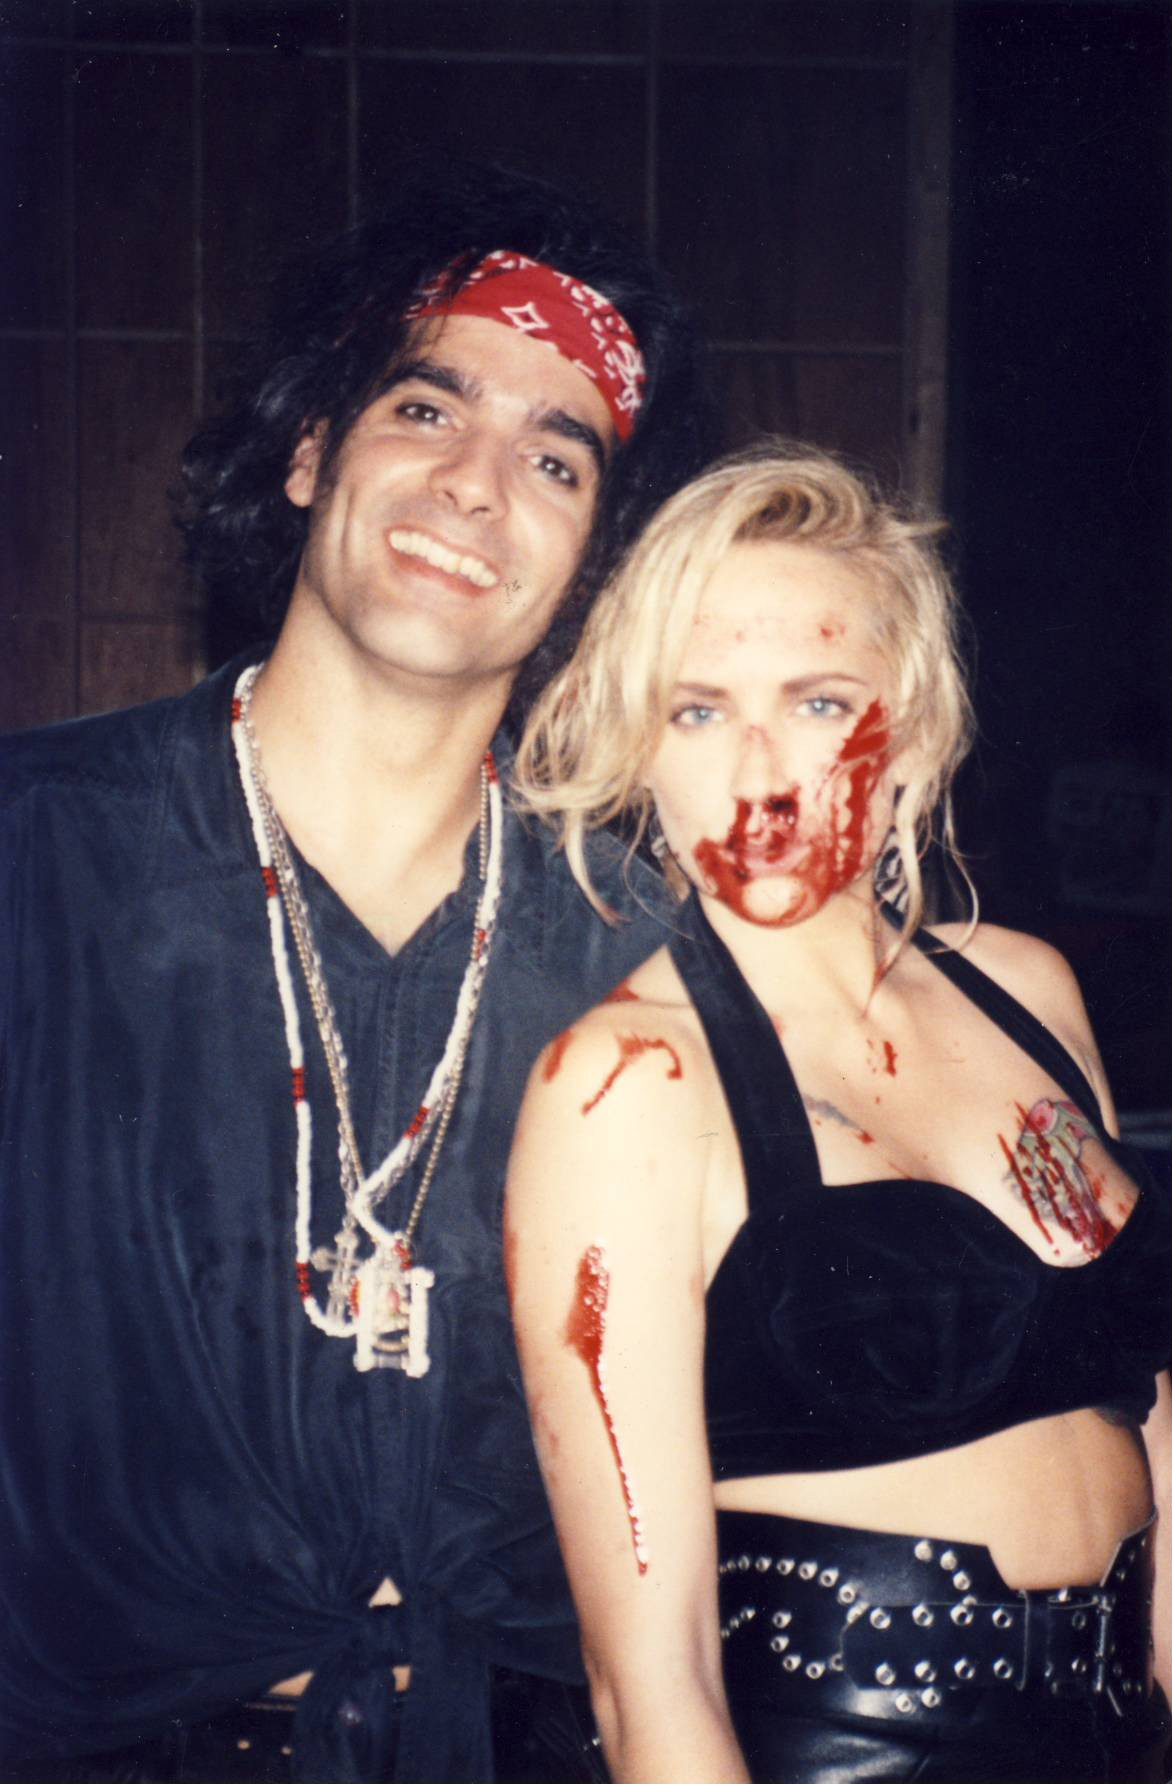 Yul Vazquez and Sherrie Rose on set of Tales from the Crypt episode On a Deadman's Chest